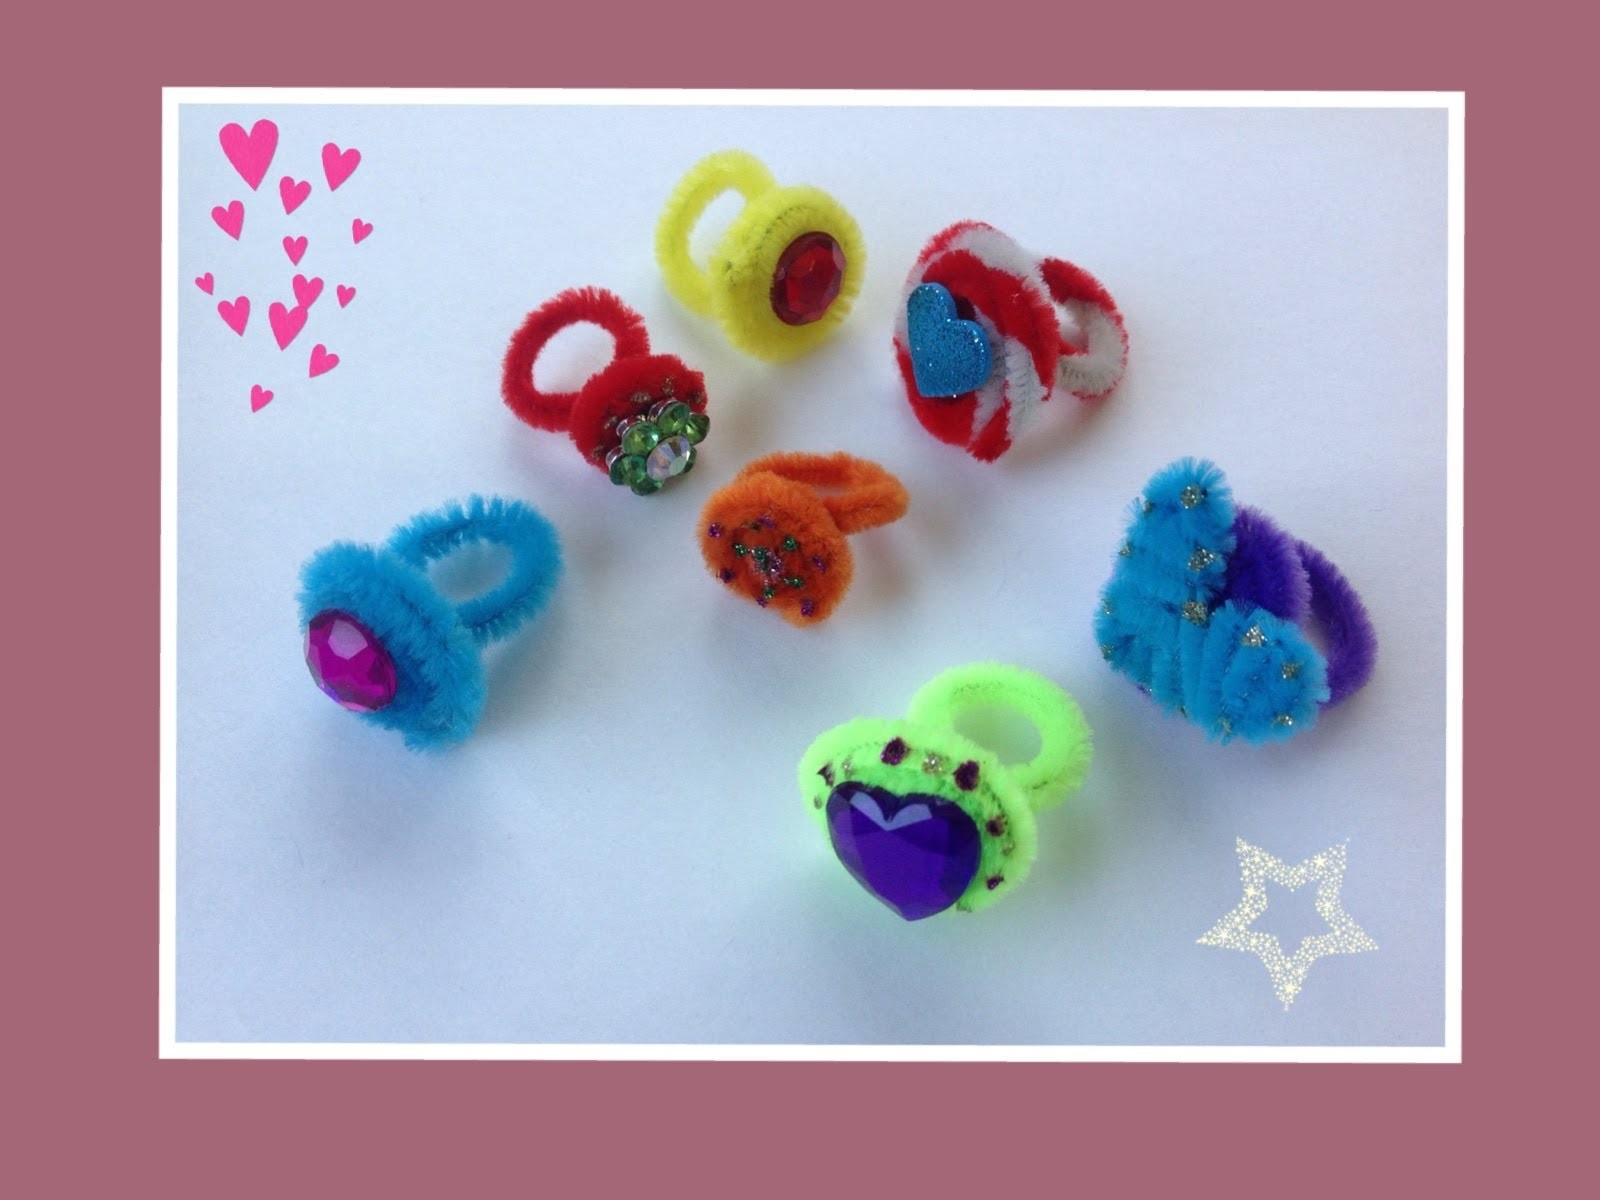 ANILLOS HECHOS CON LIMPIA PIPAS.- RINGS WITH PIPE CLEANERS .